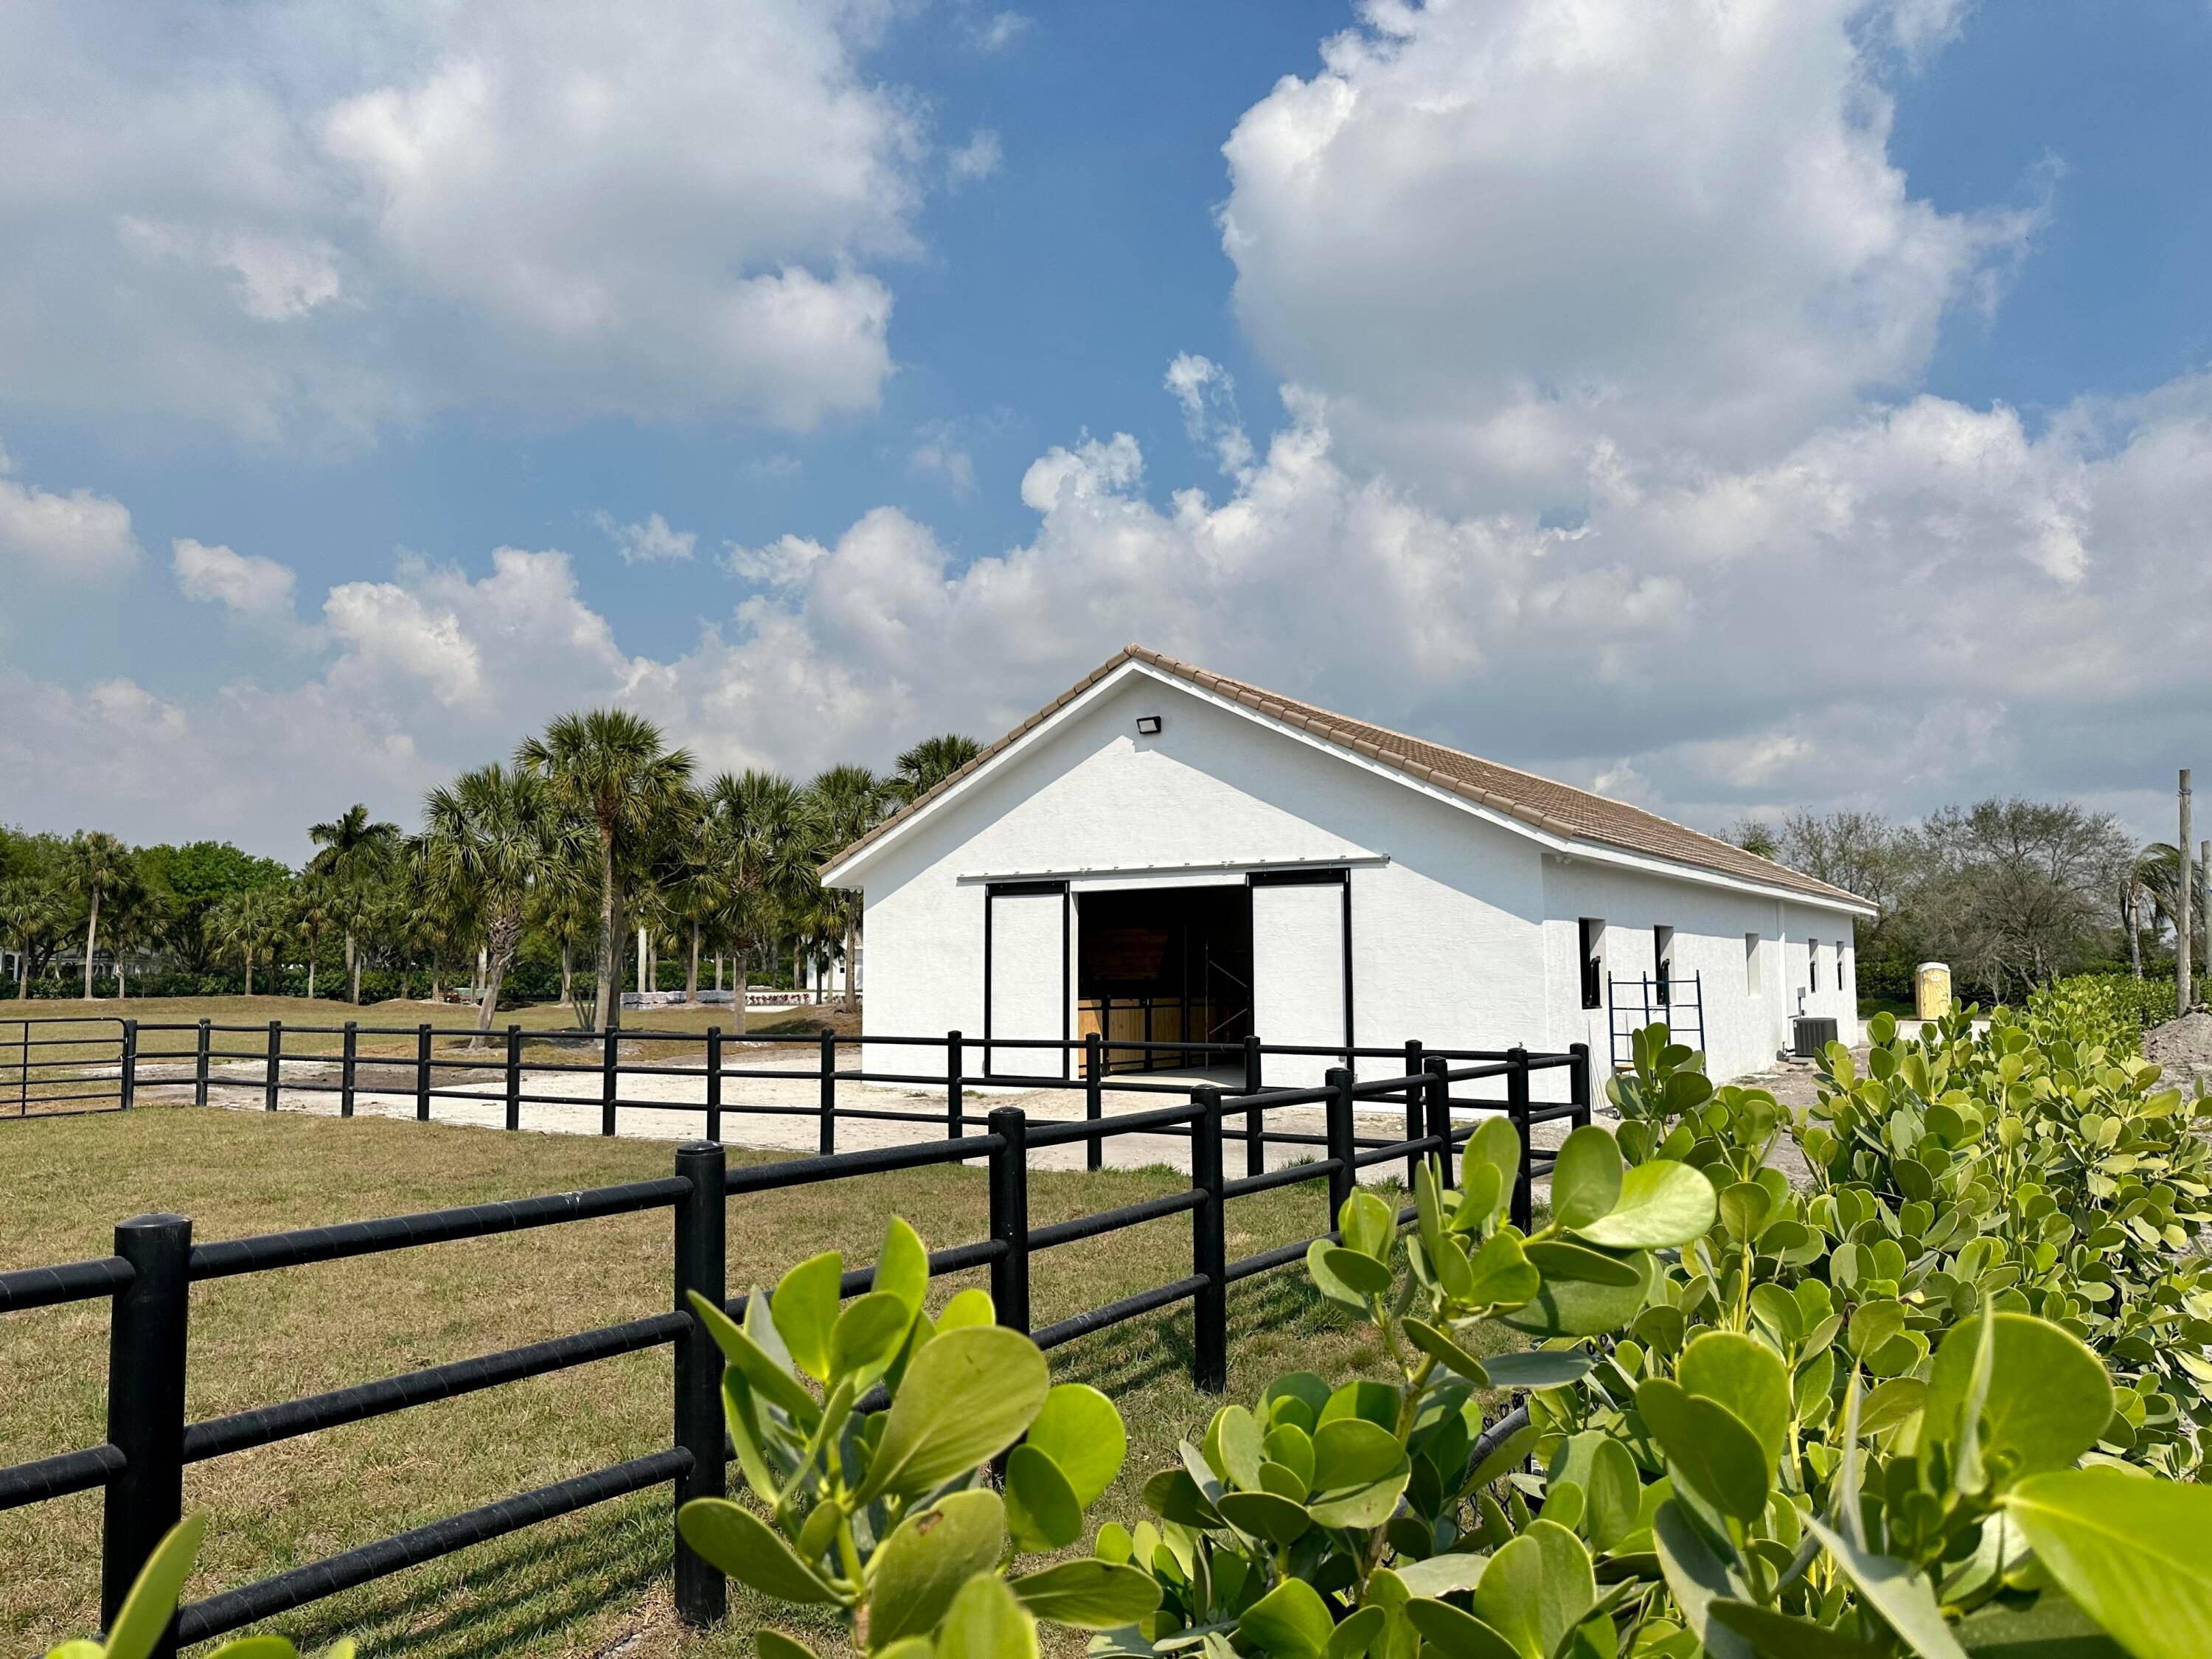 Southfields Paradise ! Also available to lease beginning 10 1 24 for the 6 month 24 25 season 16 stalls, 8 in new barn 8 in tent, 2 renovated furnished ...